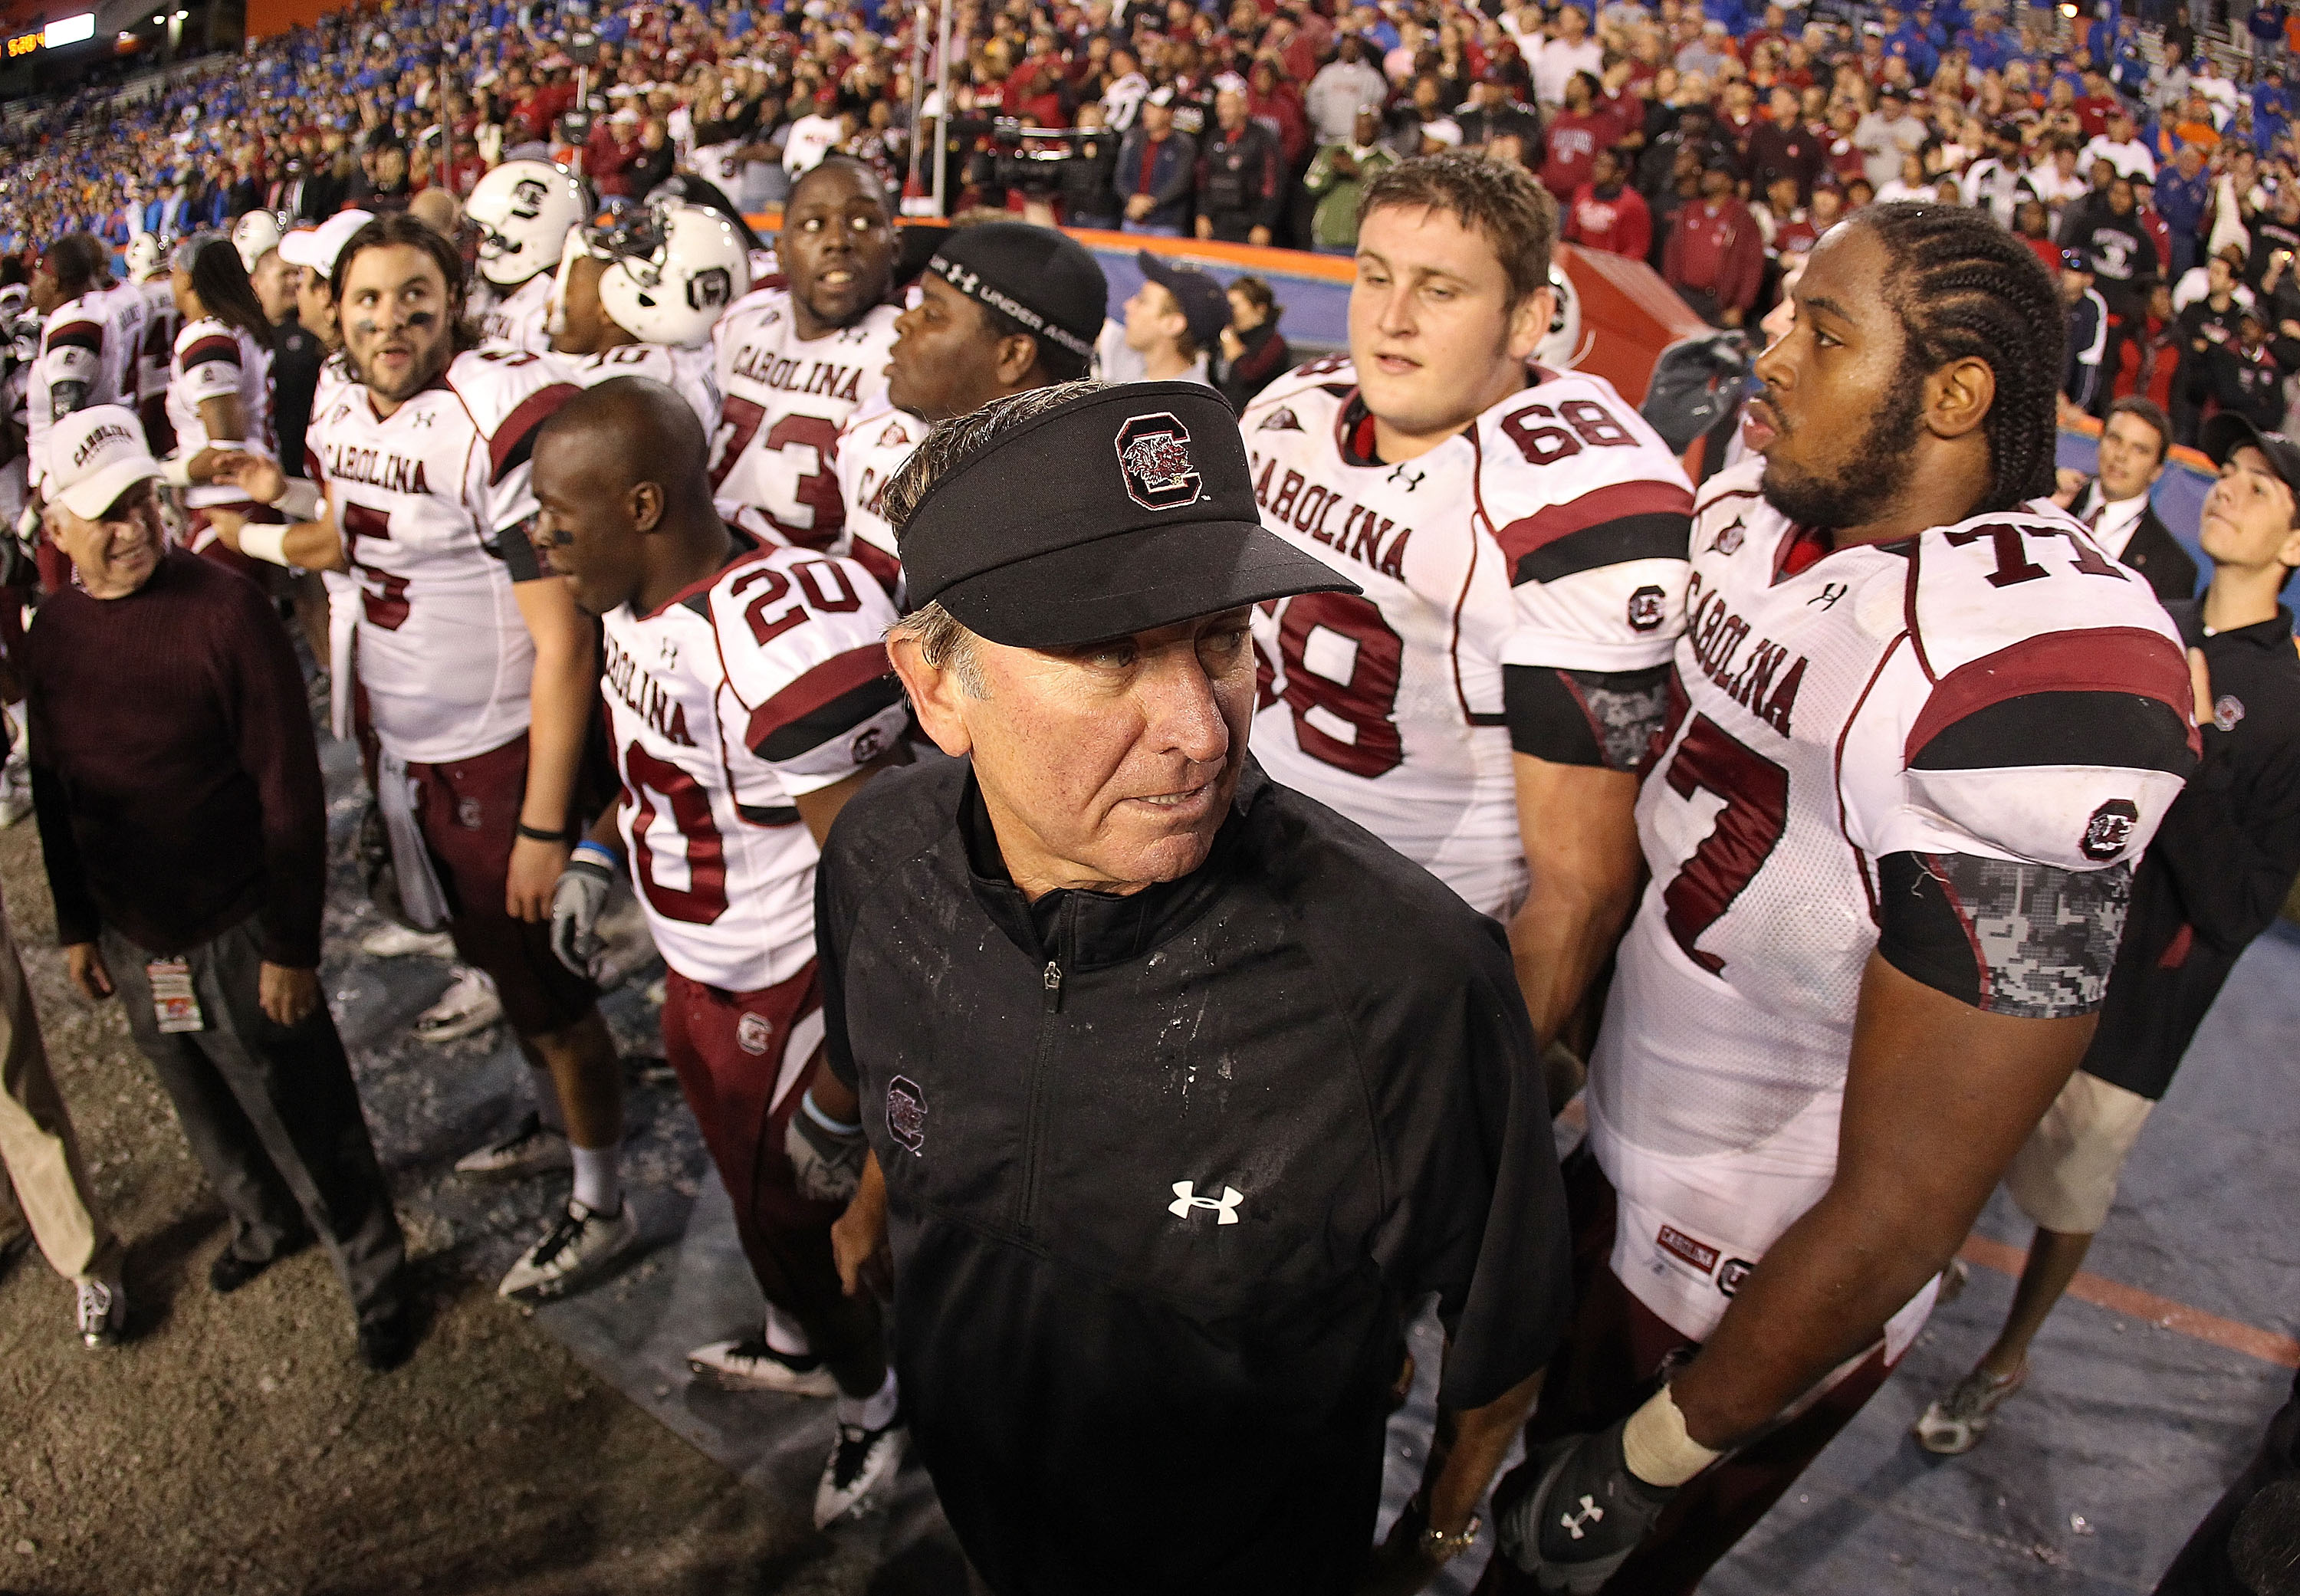 GAINESVILLE, FL - NOVEMBER 13:  South Carolina Gamecocks head coach Steve Spurrier greets his players after winning a game against the Florida Gators at Ben Hill Griffin Stadium on November 13, 2010 in Gainesville, Florida. The Gamecocks beat the Gators 3